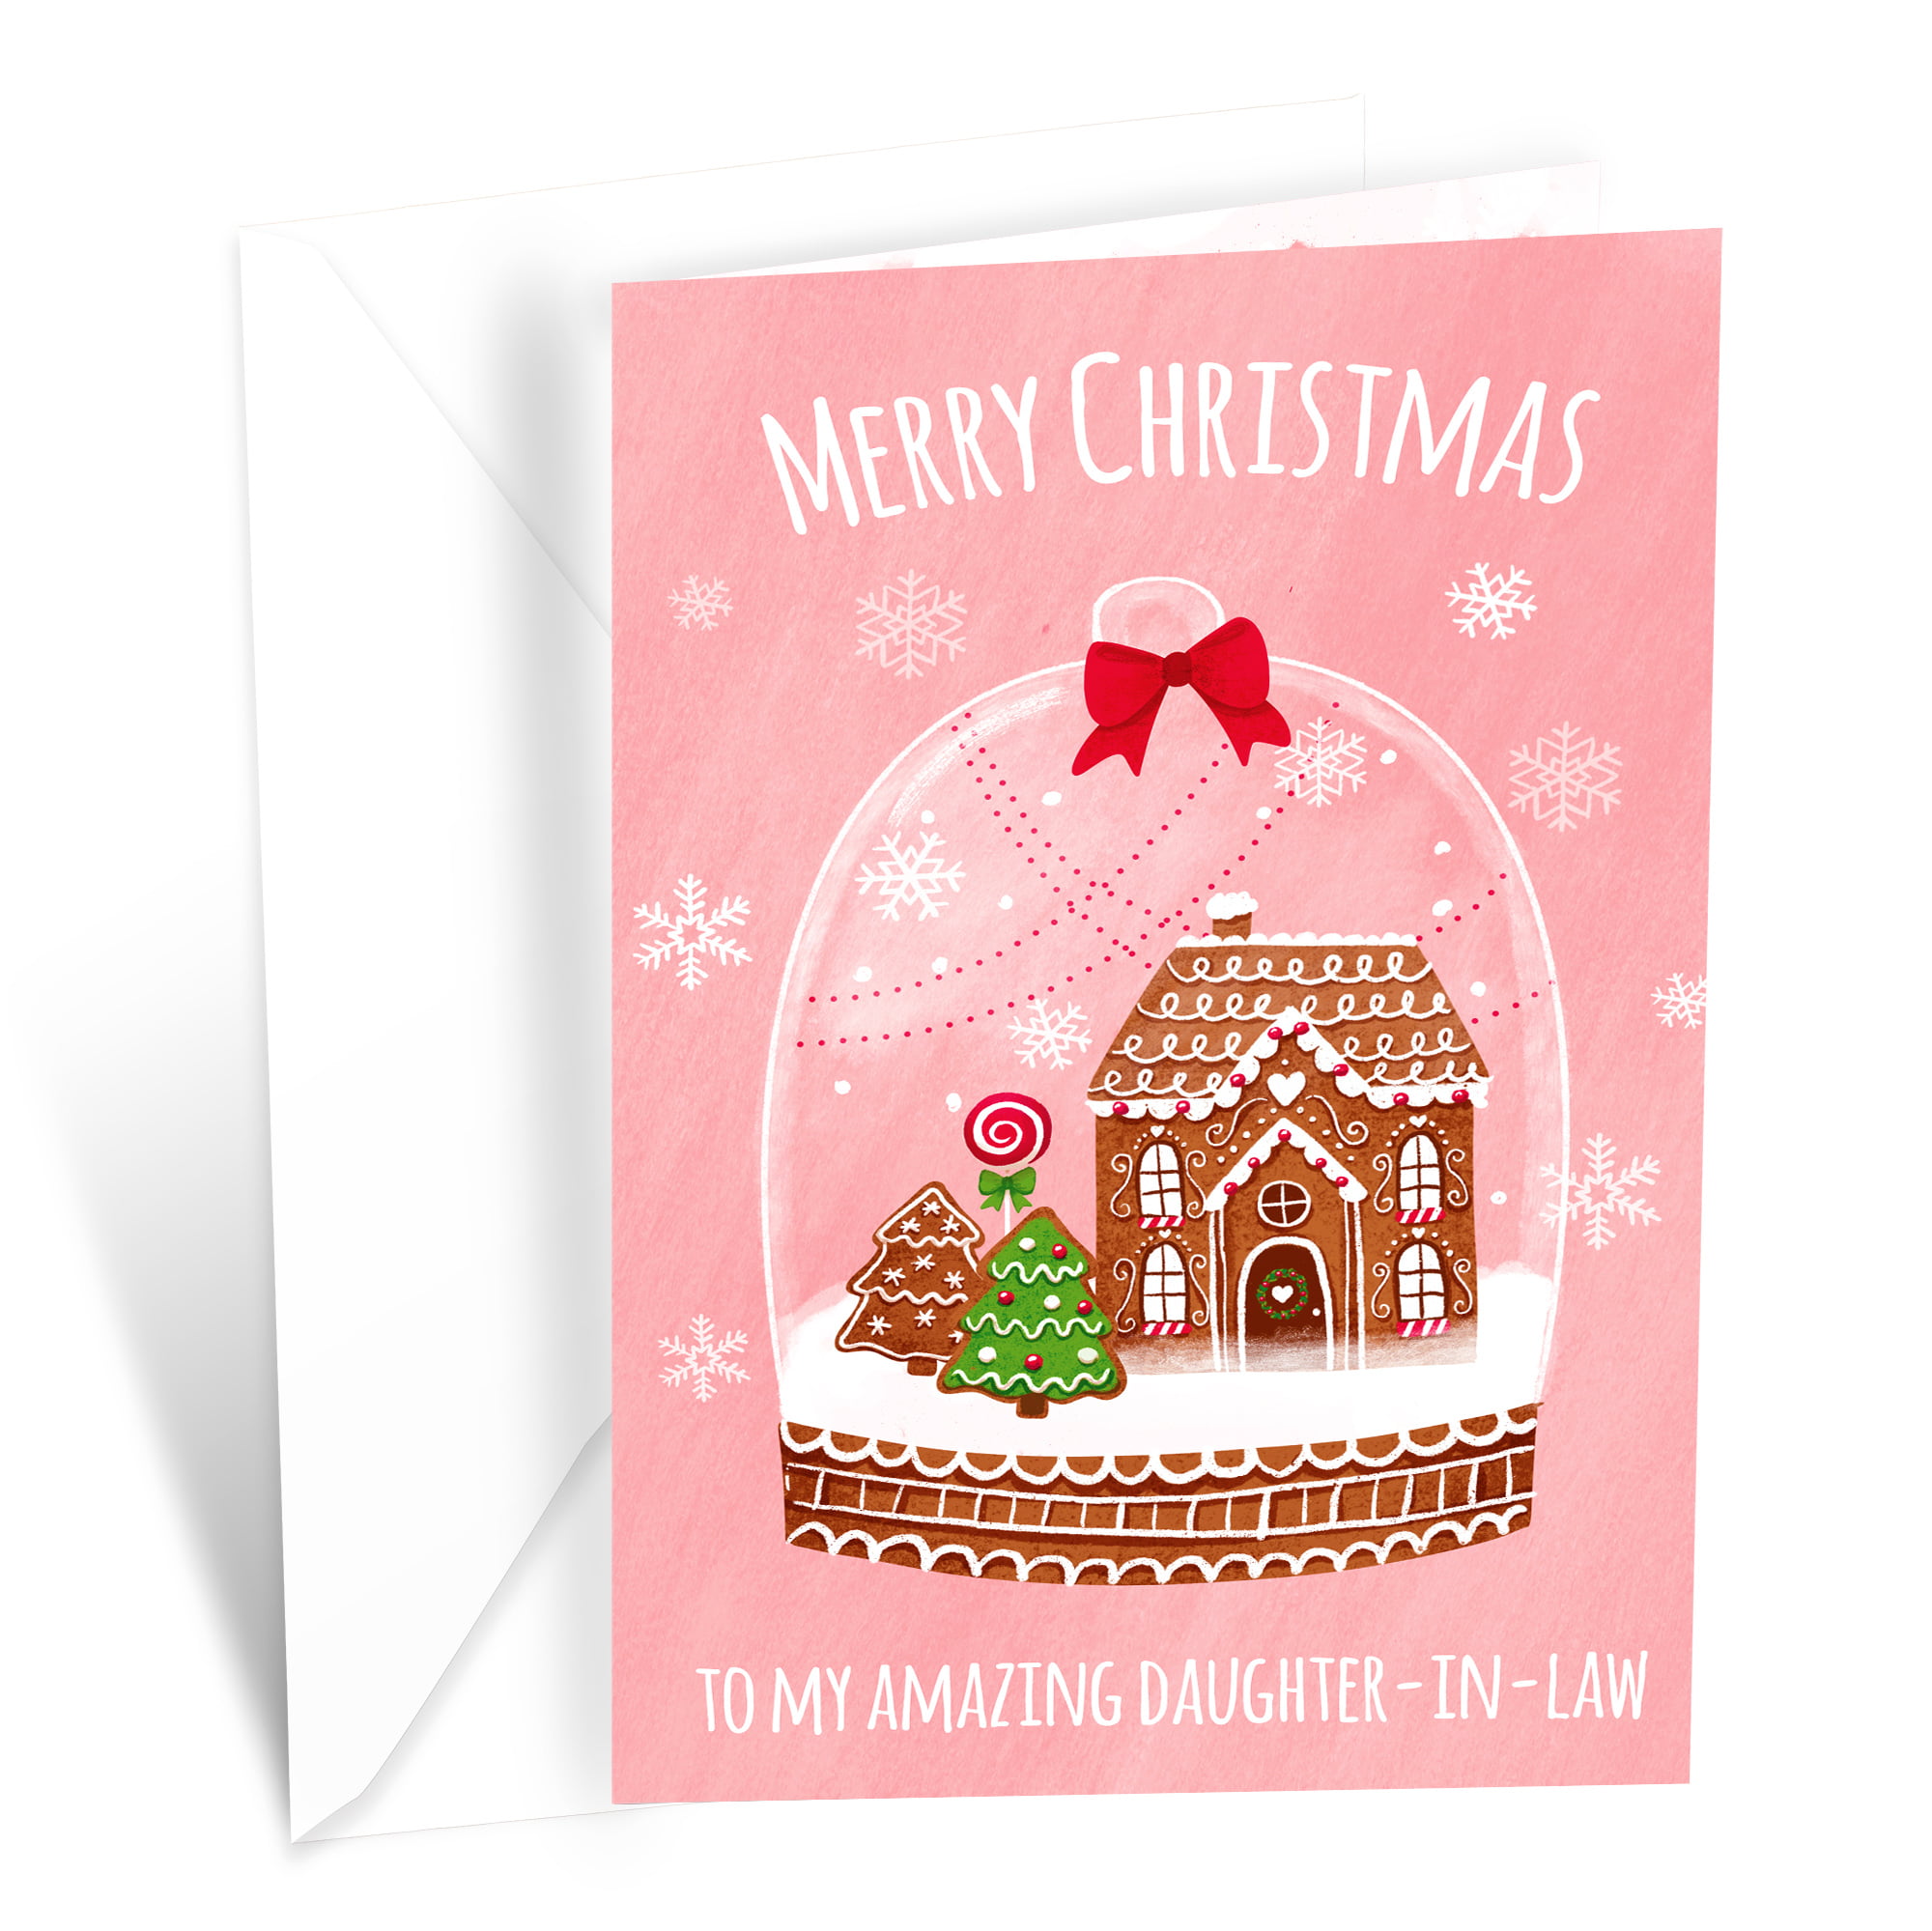 Details about   CHRISTMAS Farm Snowing LARGE Greeting Card W/ TRACKING Son & Daughter-in-Law 